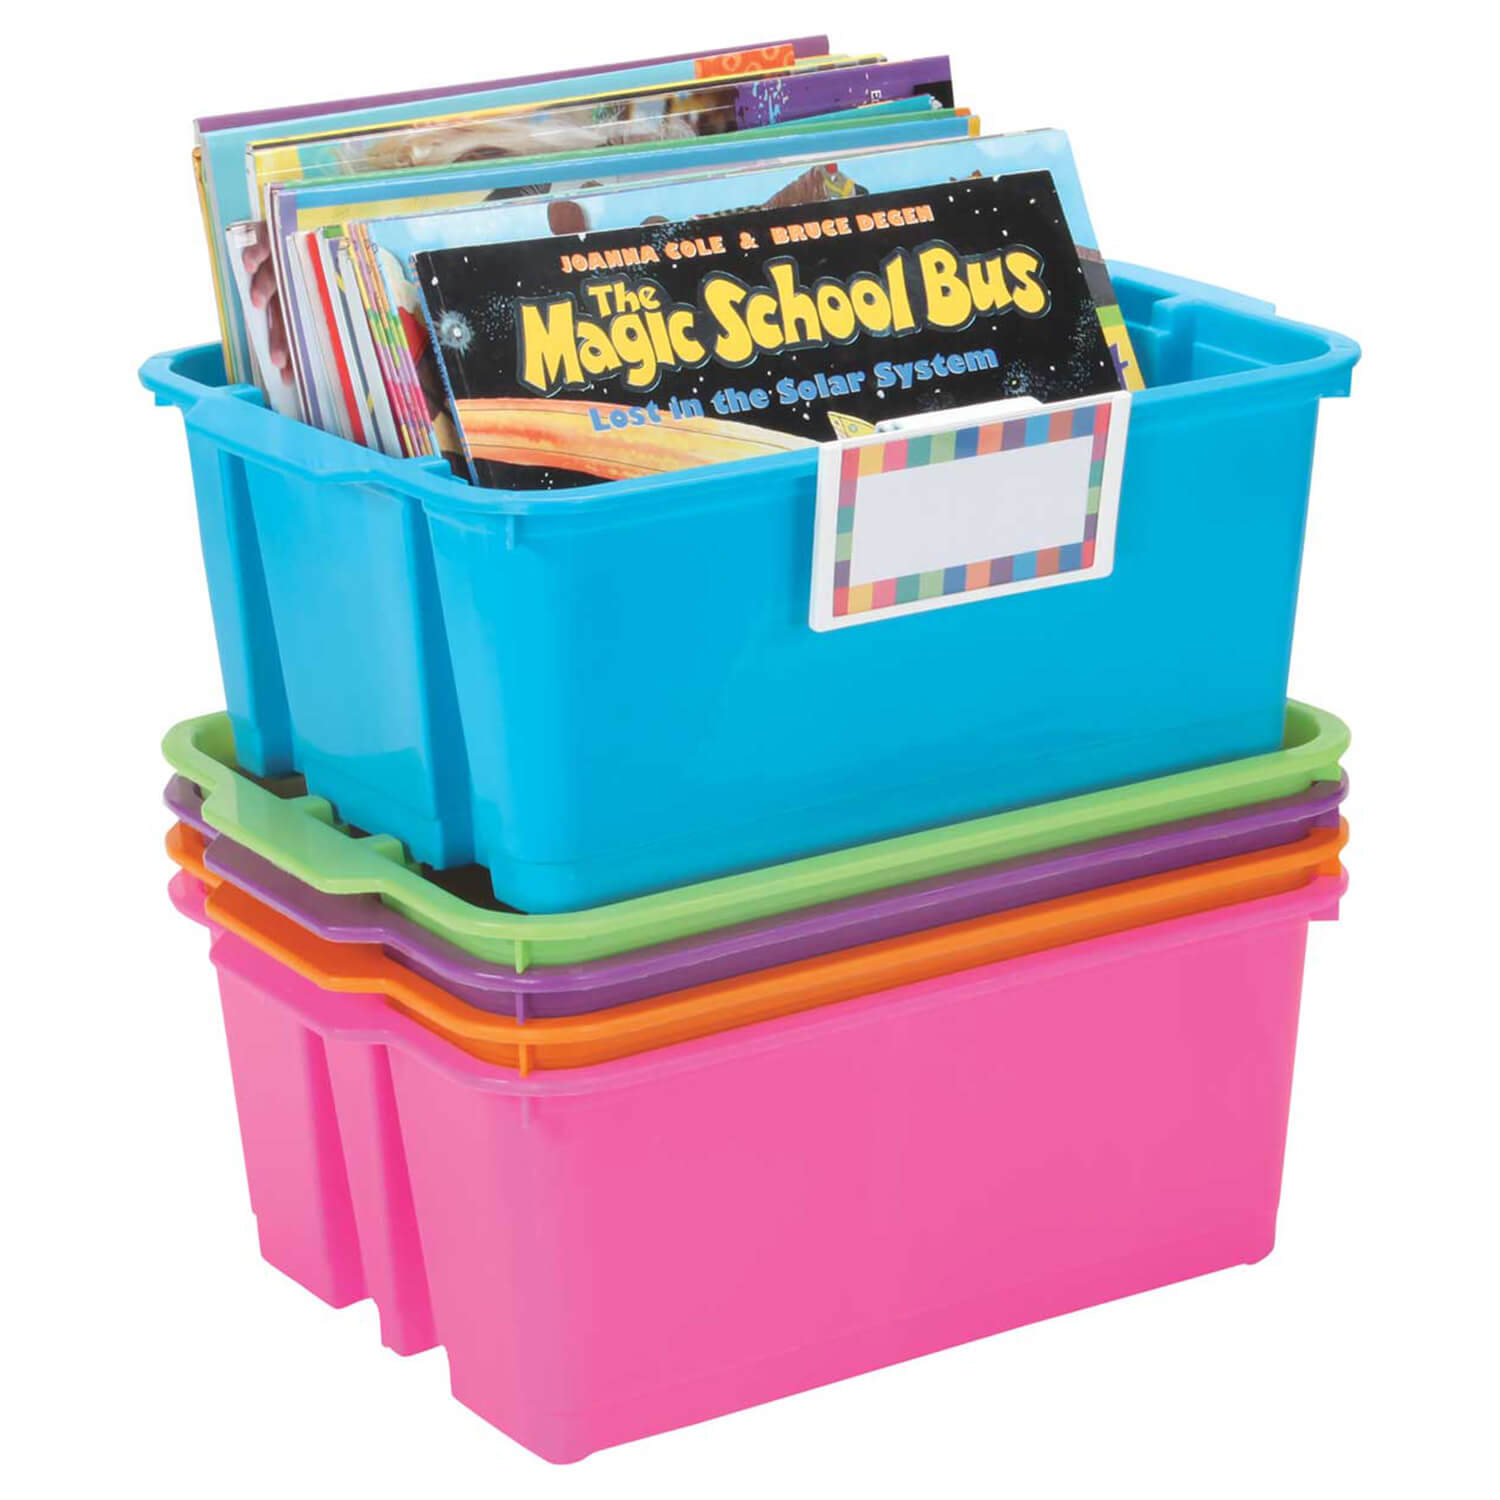 W162133354 Neon Classroom Stacking Bins With Universal Label Holders - 5 Pc.